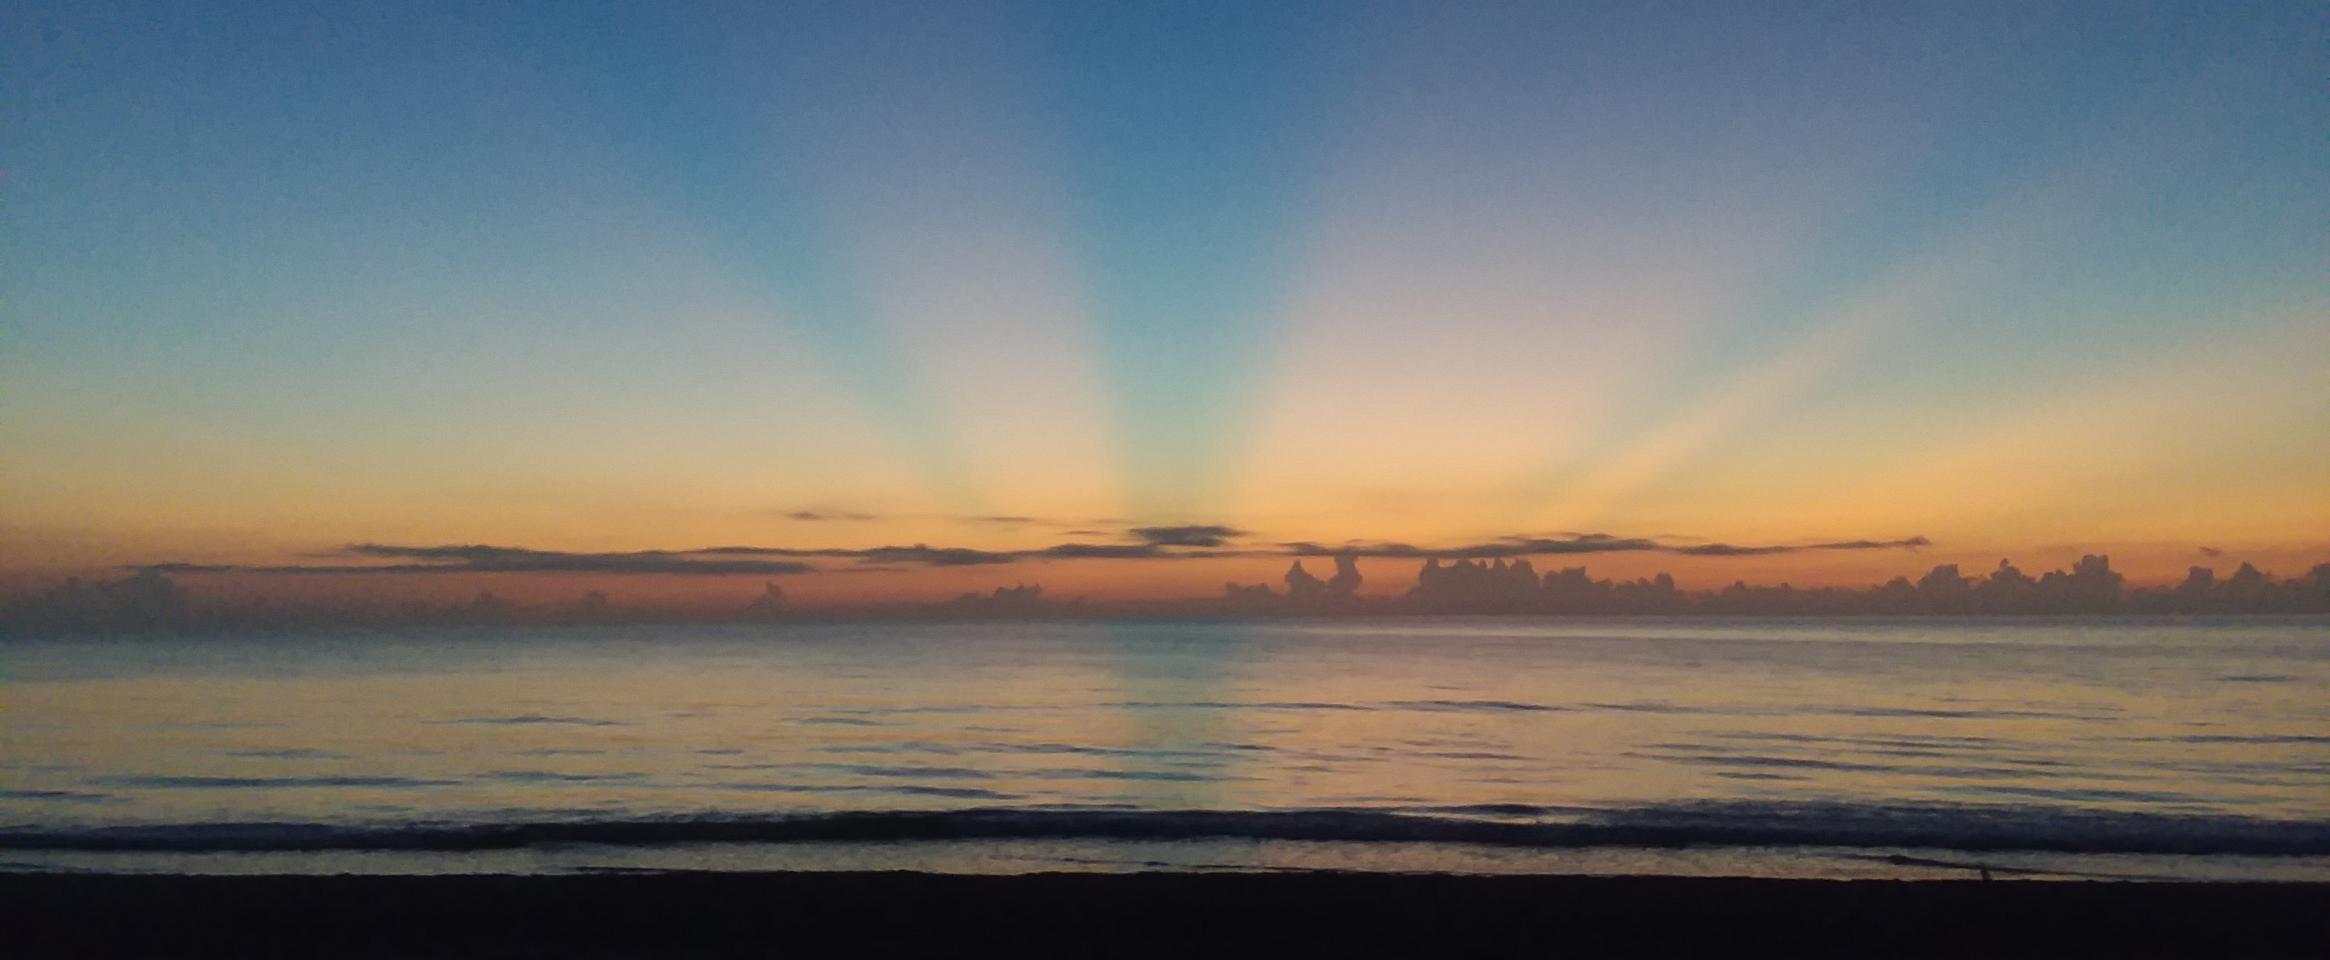 Photo of a colorful sunrise over the horizon of a calm ocean offshore of Melbourne, Florida. The morning light is barely peeking, blending into the night.